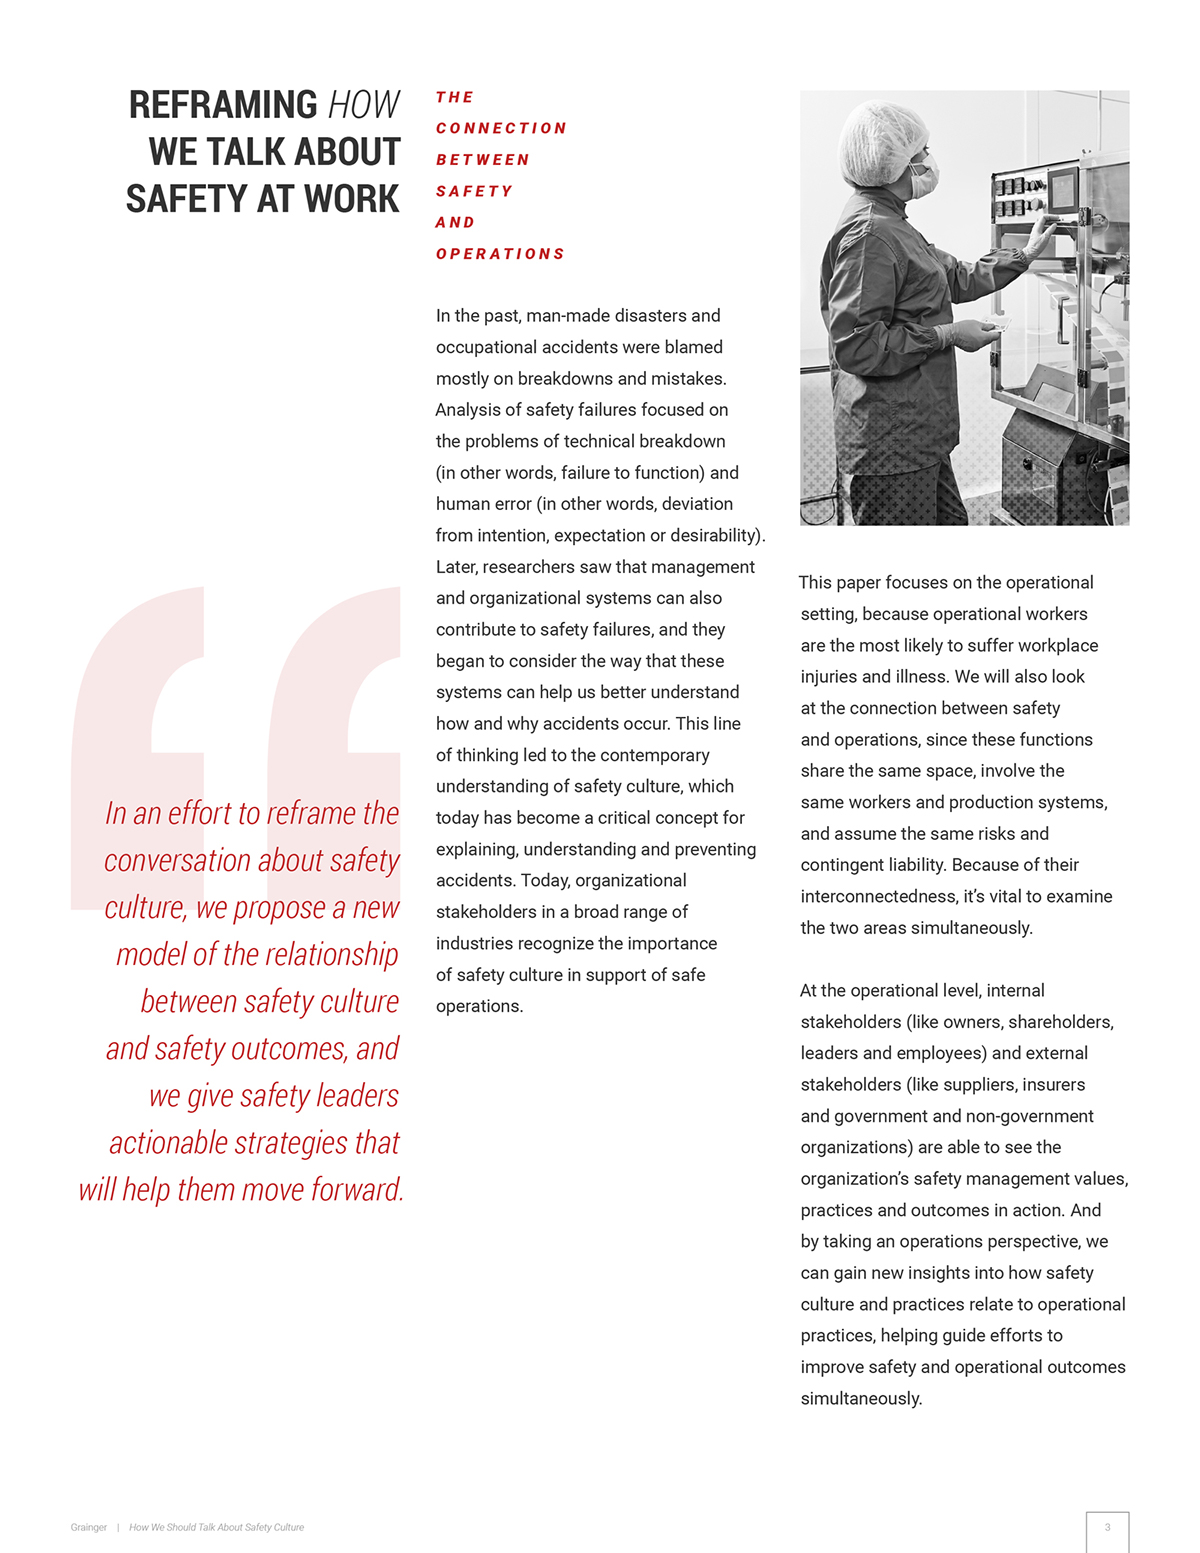 whitepaper Grainger safety culture ebook e-book construction print Layout company